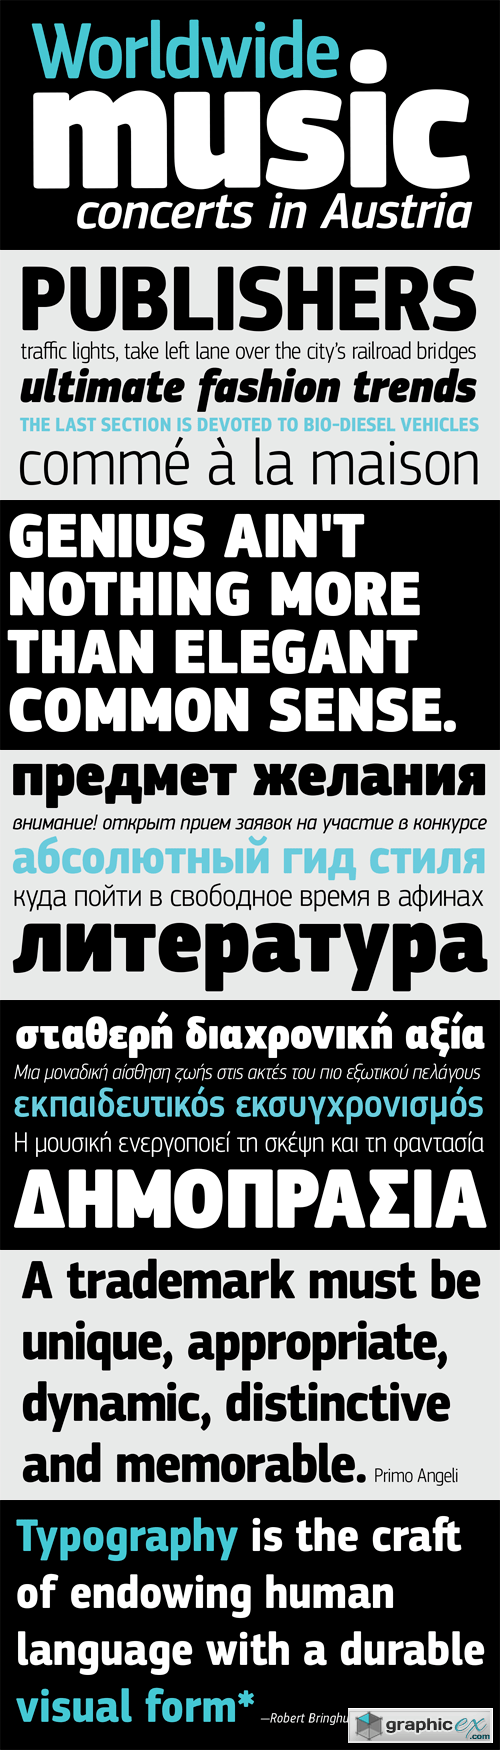 PF Square Sans Condensed Pro Font Family - 12 Fonts for $595